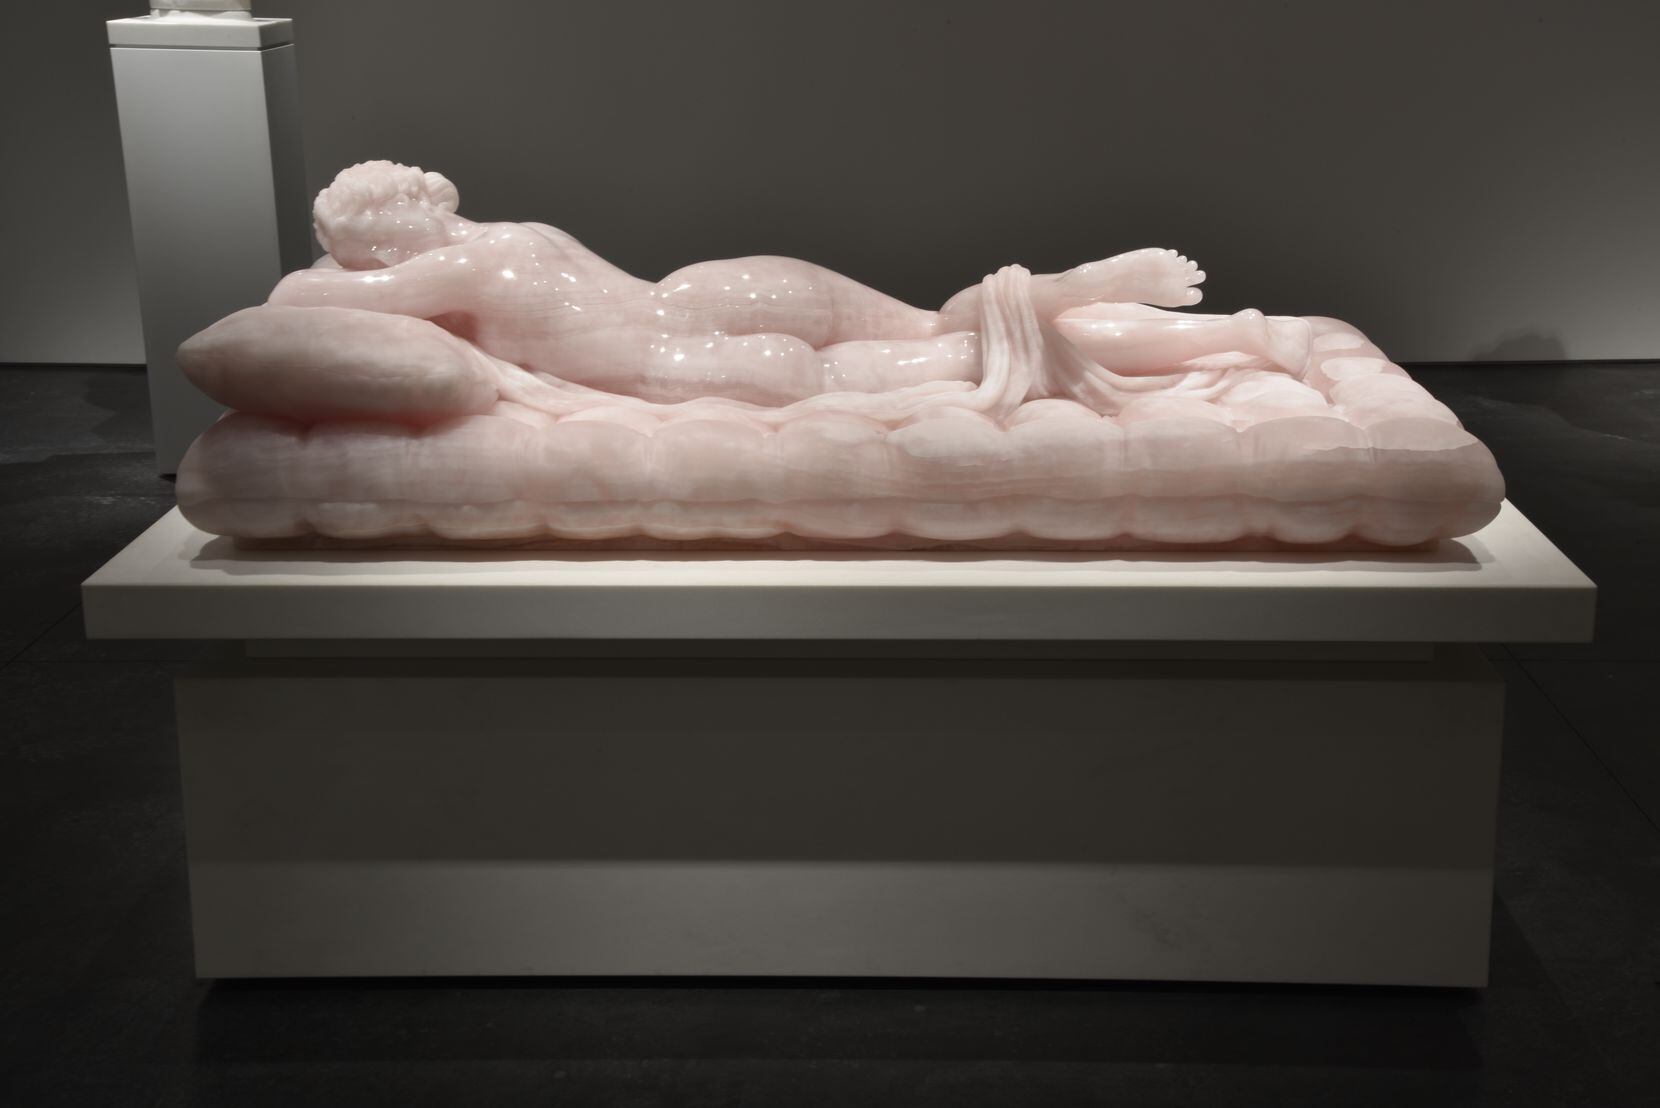 Barry X Ball's mesmerizing "Sleeping Hermaphrodite" is more striking and erotic than the model it’s based on, which resides at the Louvre in Paris.